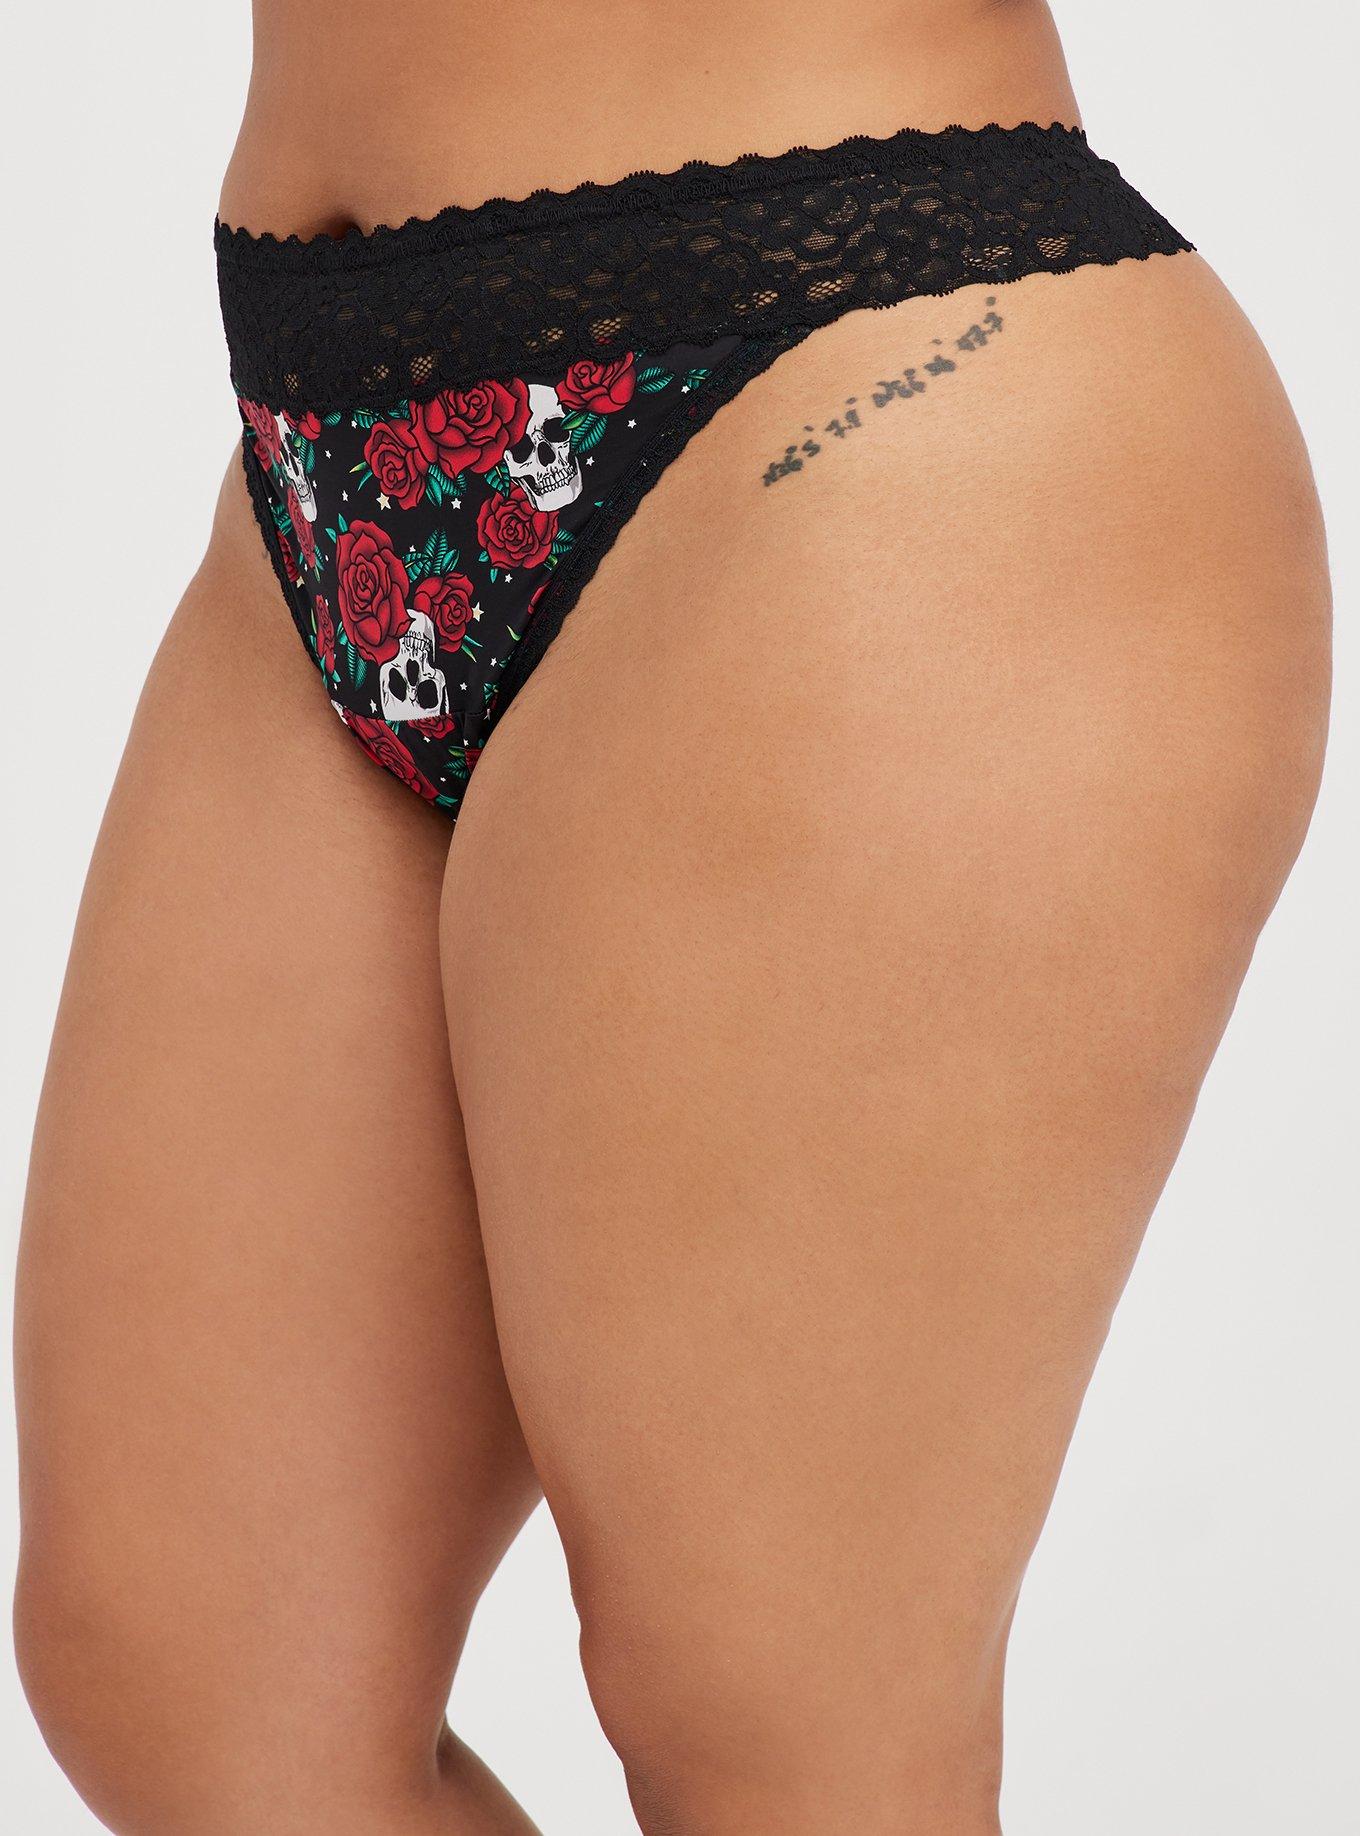  Native American Skull Women's Sexy G-String Beautiful High Waist  Panties Thongs T Back Underwear S : Clothing, Shoes & Jewelry